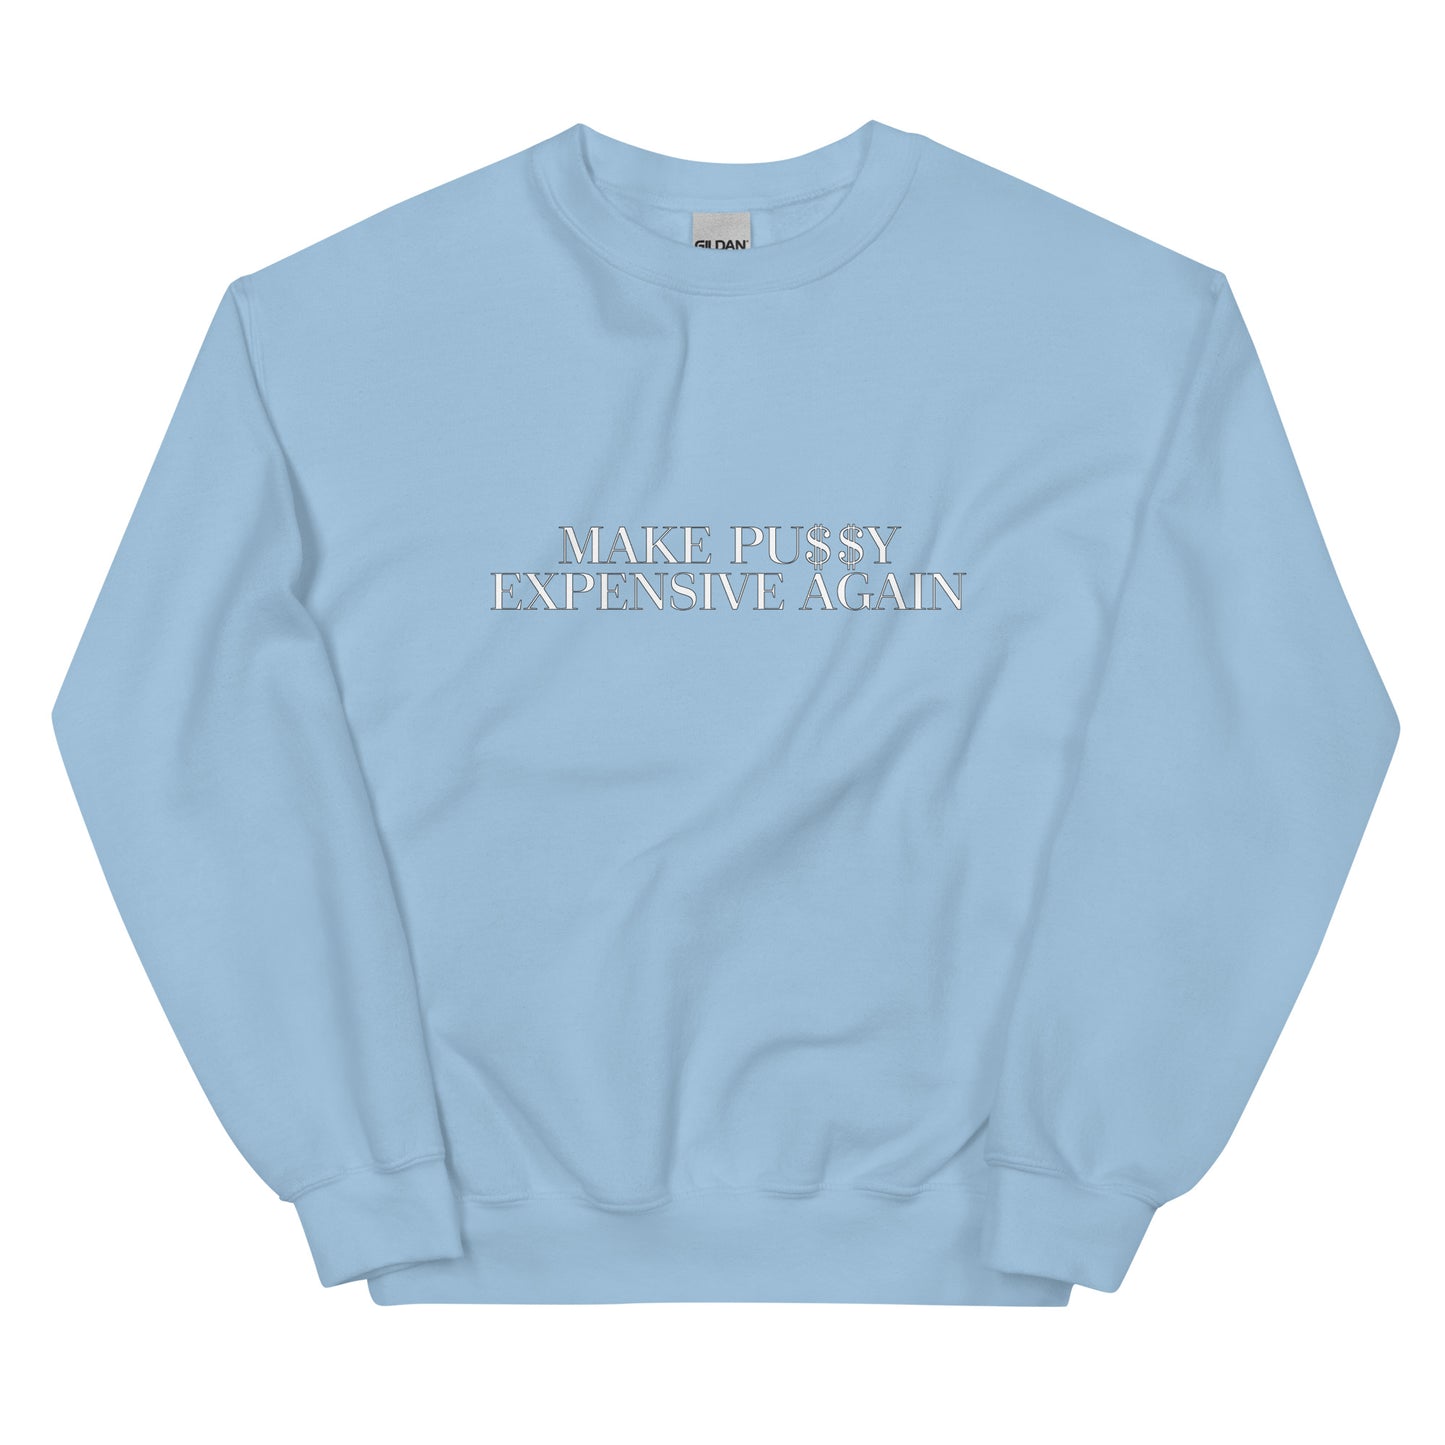 Make PU$$Y Expensive Again(Crew Neck)